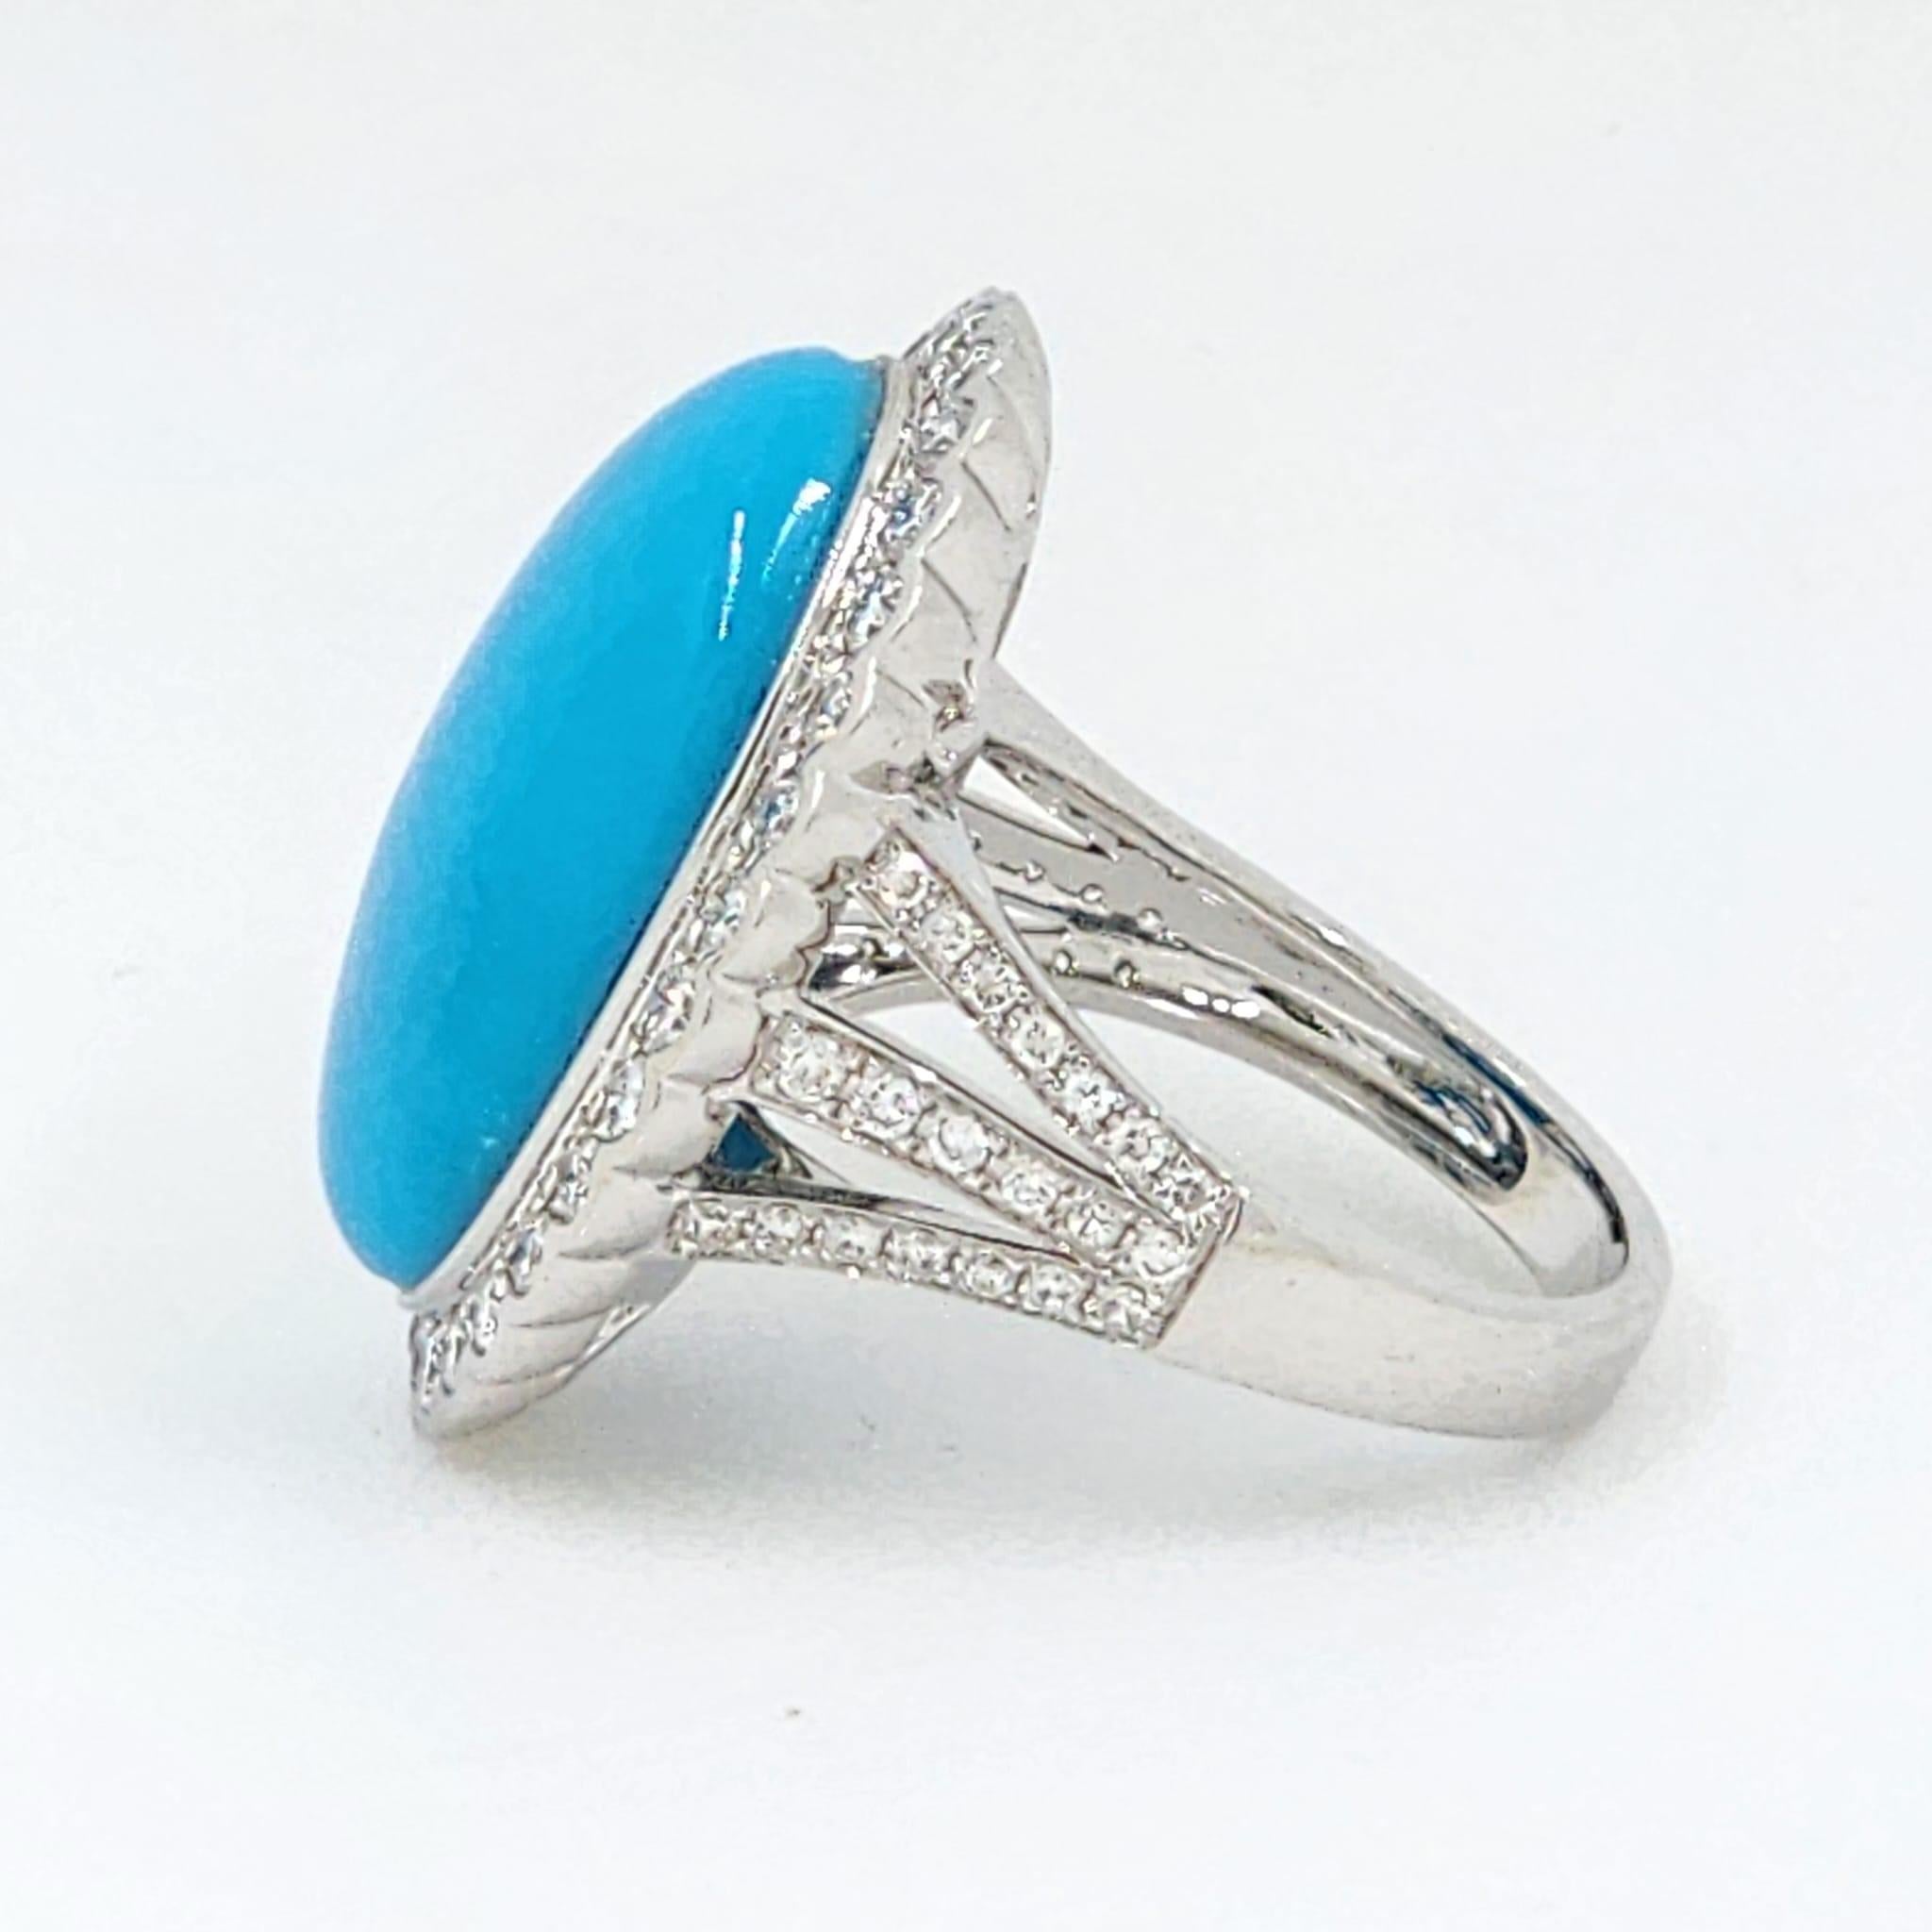 Contemporary Vintage 11.64 Carat Sleeping Beauty Turquoise Diamond Ring in 14k White Gold For Sale